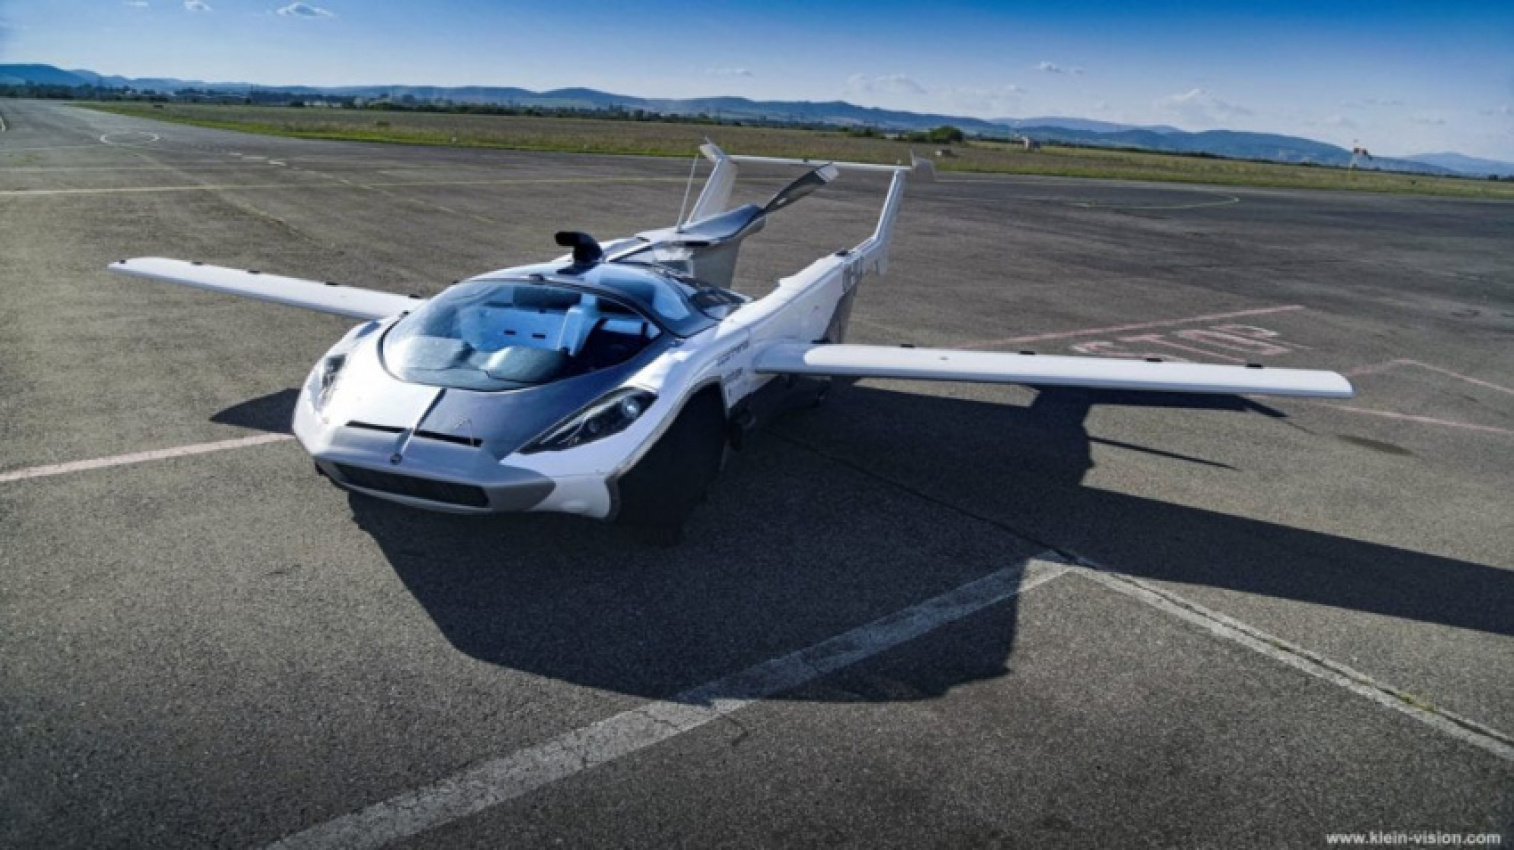 autos, cars, europe, aircar, anton zajac, klein vision, stefan klein, aircar completes the first flight of a flying car between two international airports